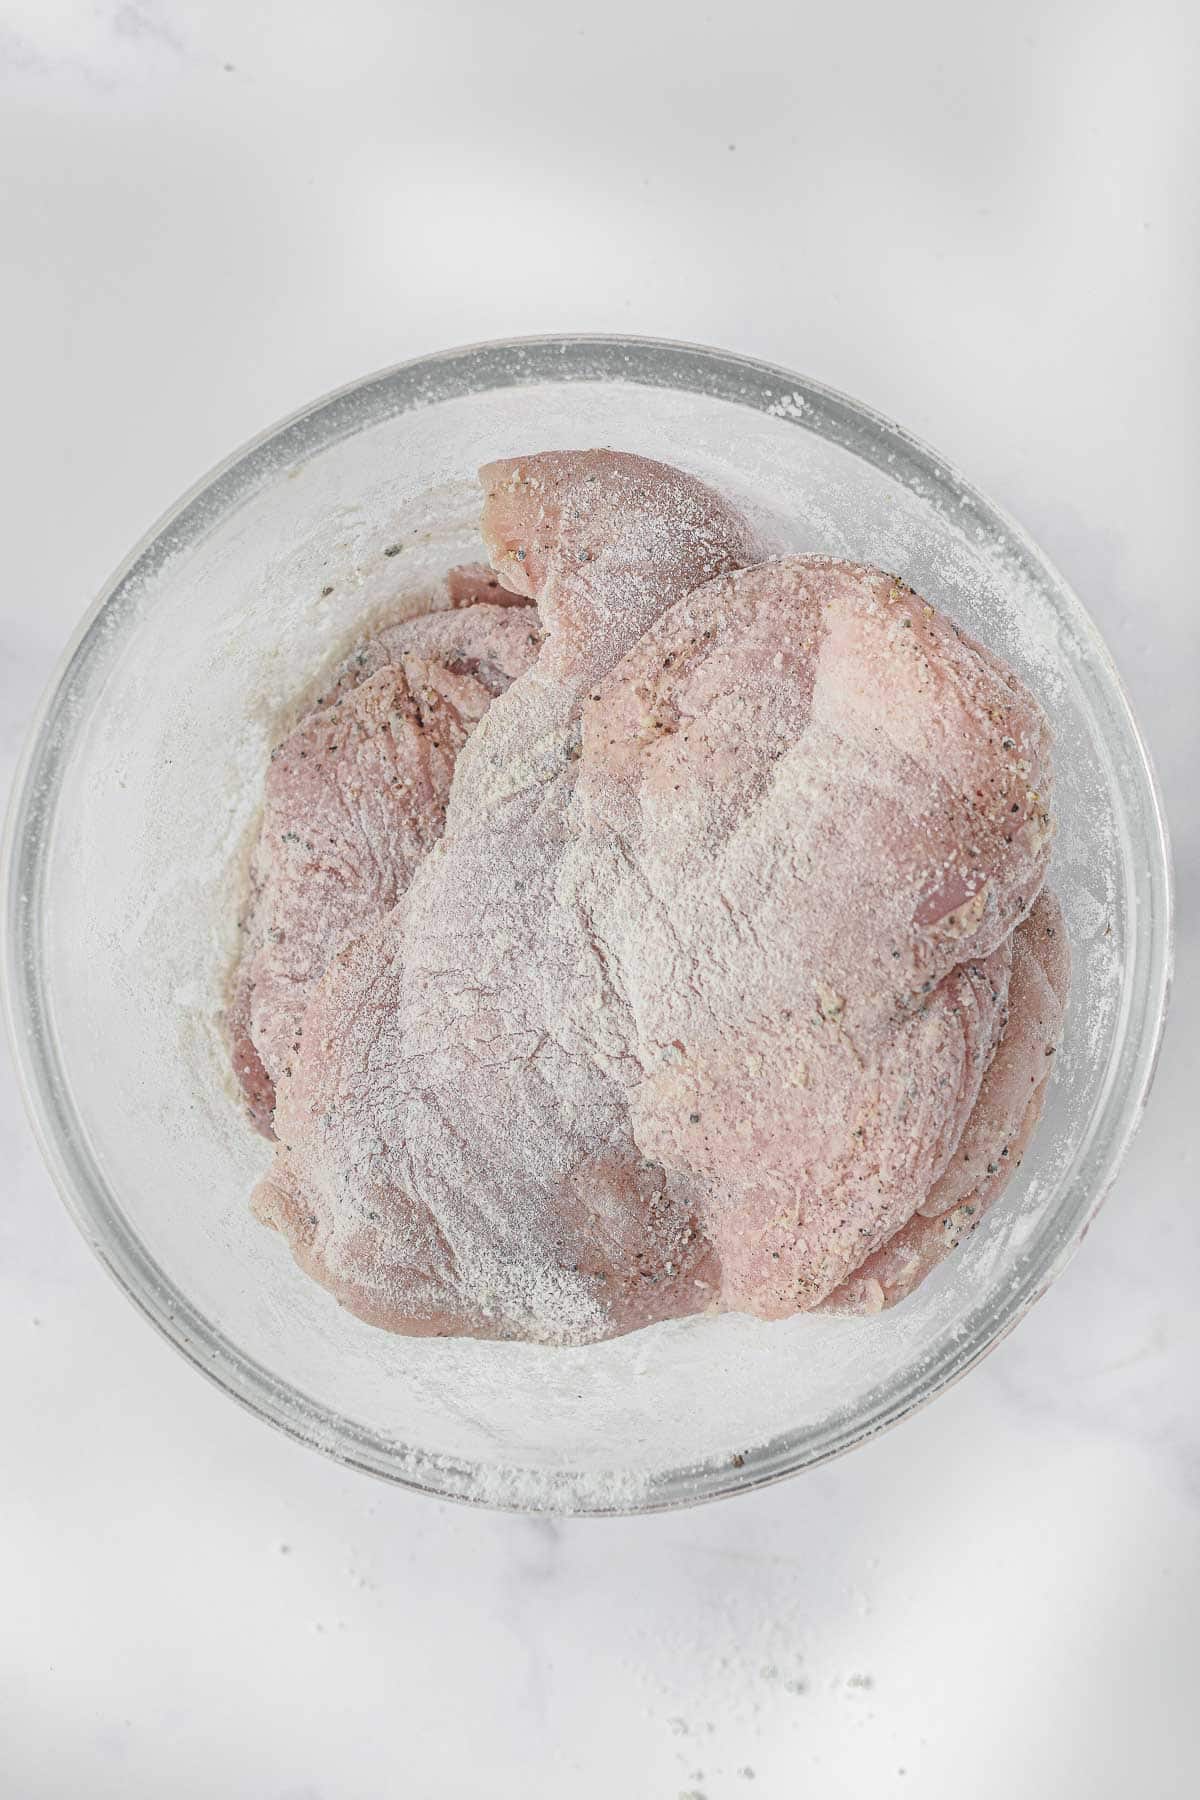 glass mixing bowl with raw chicken breasts dredged in white flour.